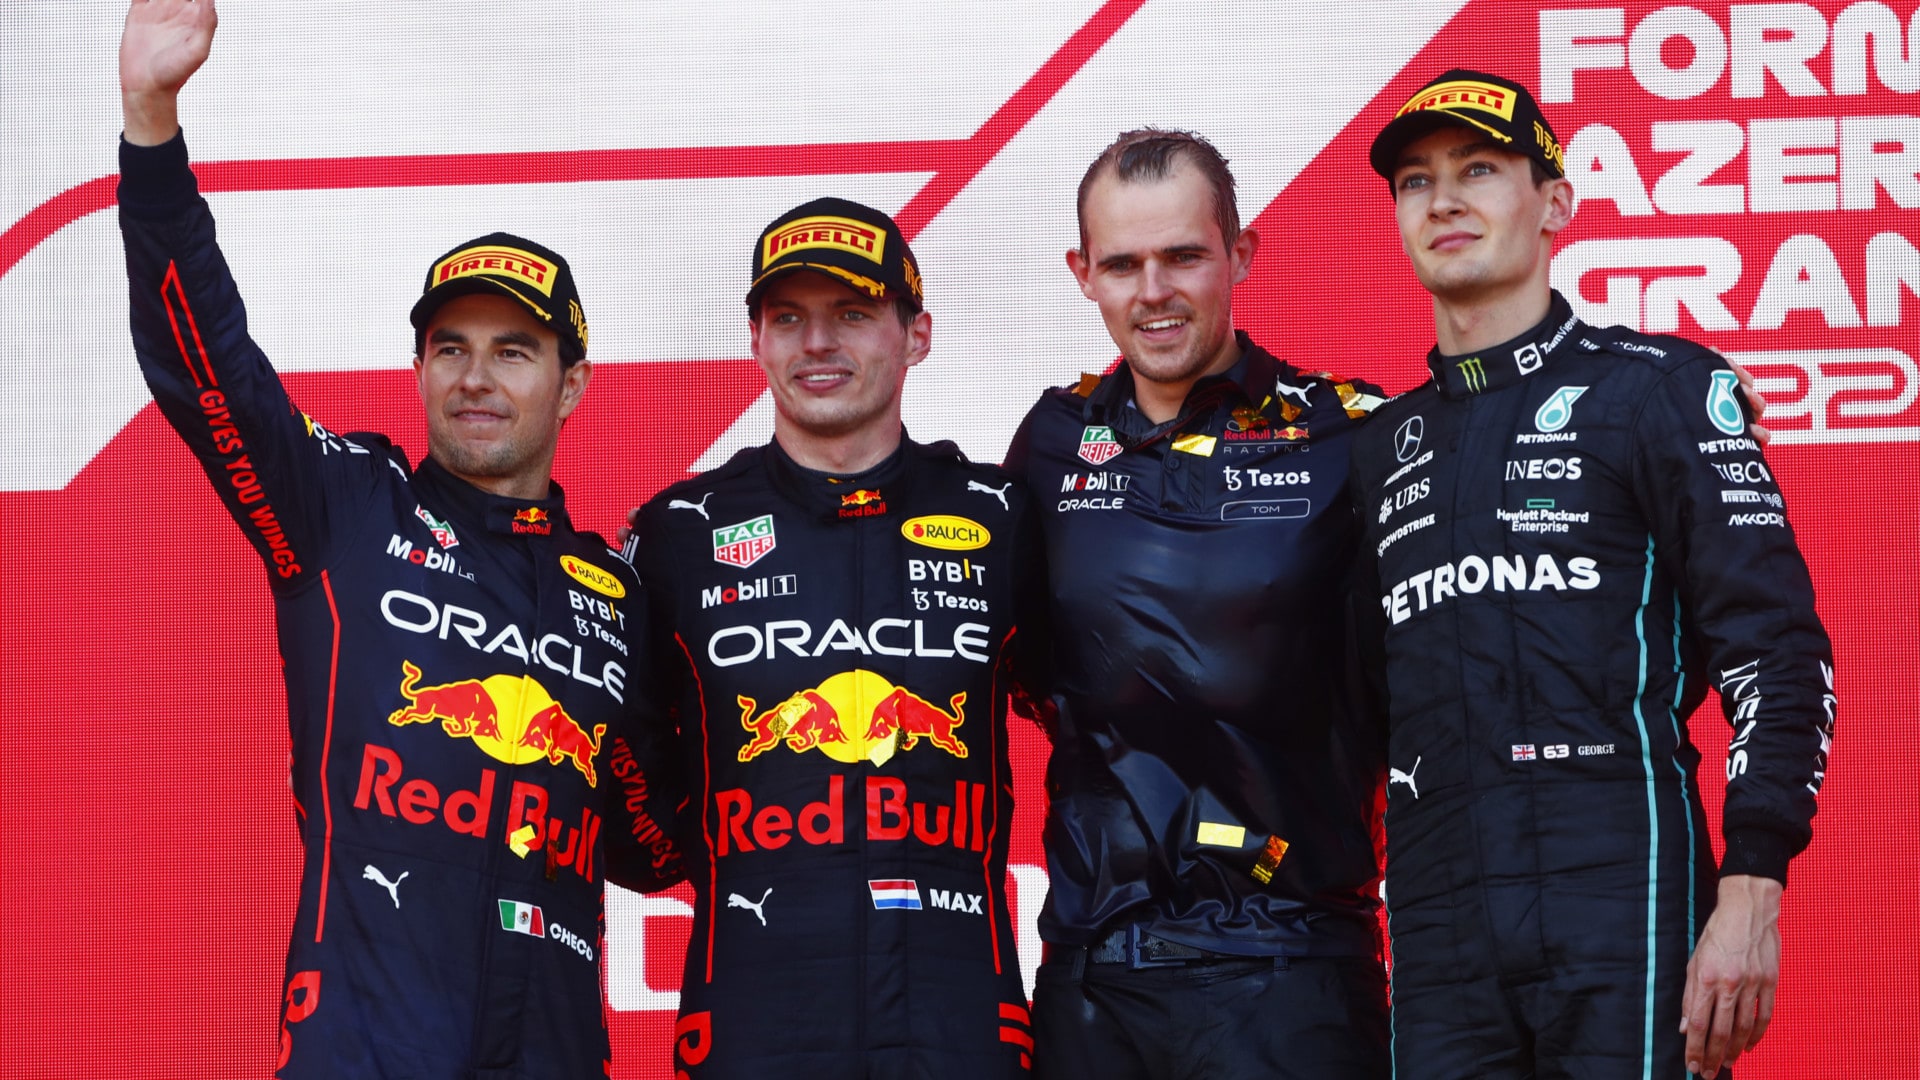 2022 Azerbaijan Grand Prix Tyre Performance Analysis - BAKU CITY CIRCUIT, AZERBAIJAN - JUNE 12: Sergio Perez, Red Bull Racing, 2nd position, Max Verstappen, Red Bull Racing, 1st position, the Red Bull trophy delegate and George Russell, Mercedes-AMG, 3rd position, on the podium during the Azerbaijan GP at Baku City Circuit on Sunday June 12, 2022 in Baku, Azerbaijan. (Photo by Sam Bloxham / LAT Images)